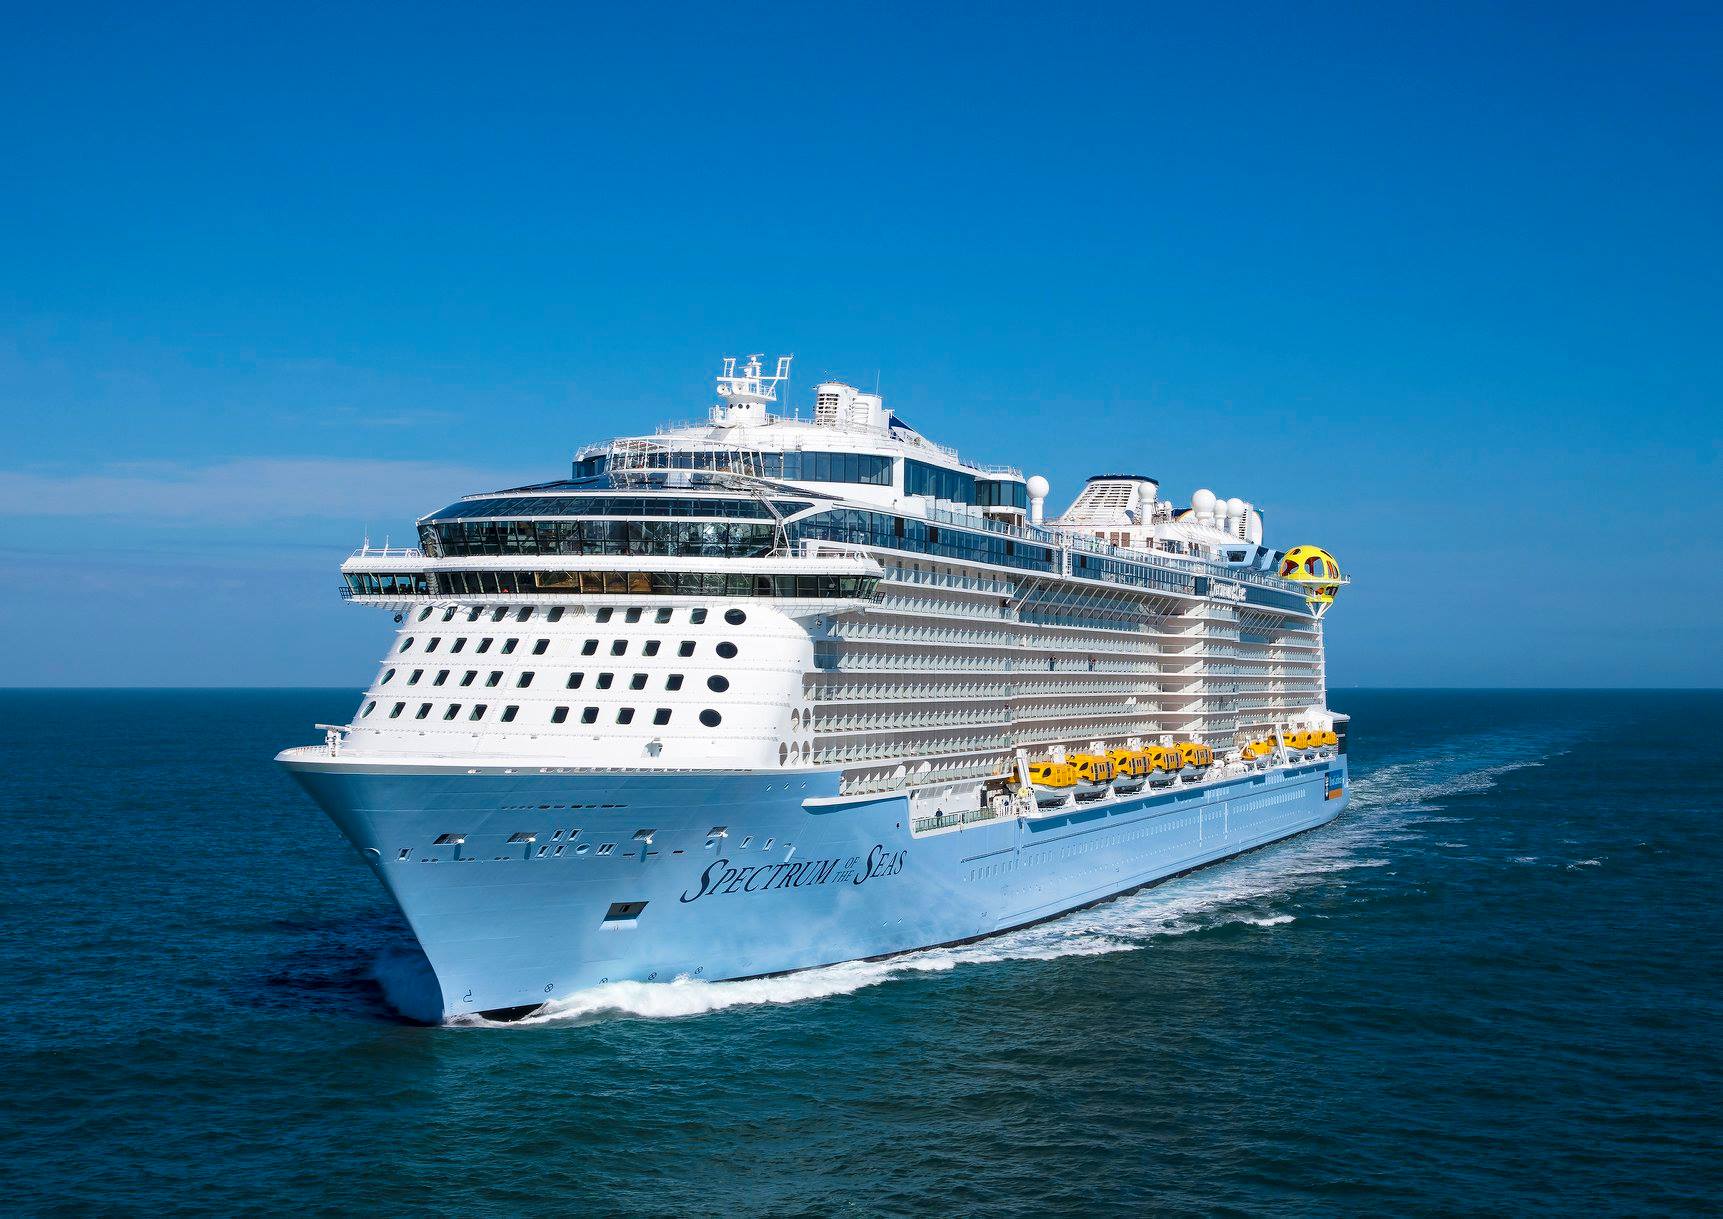 Spectrum of the Seas joins Royal Caribbean's fleet following delivery